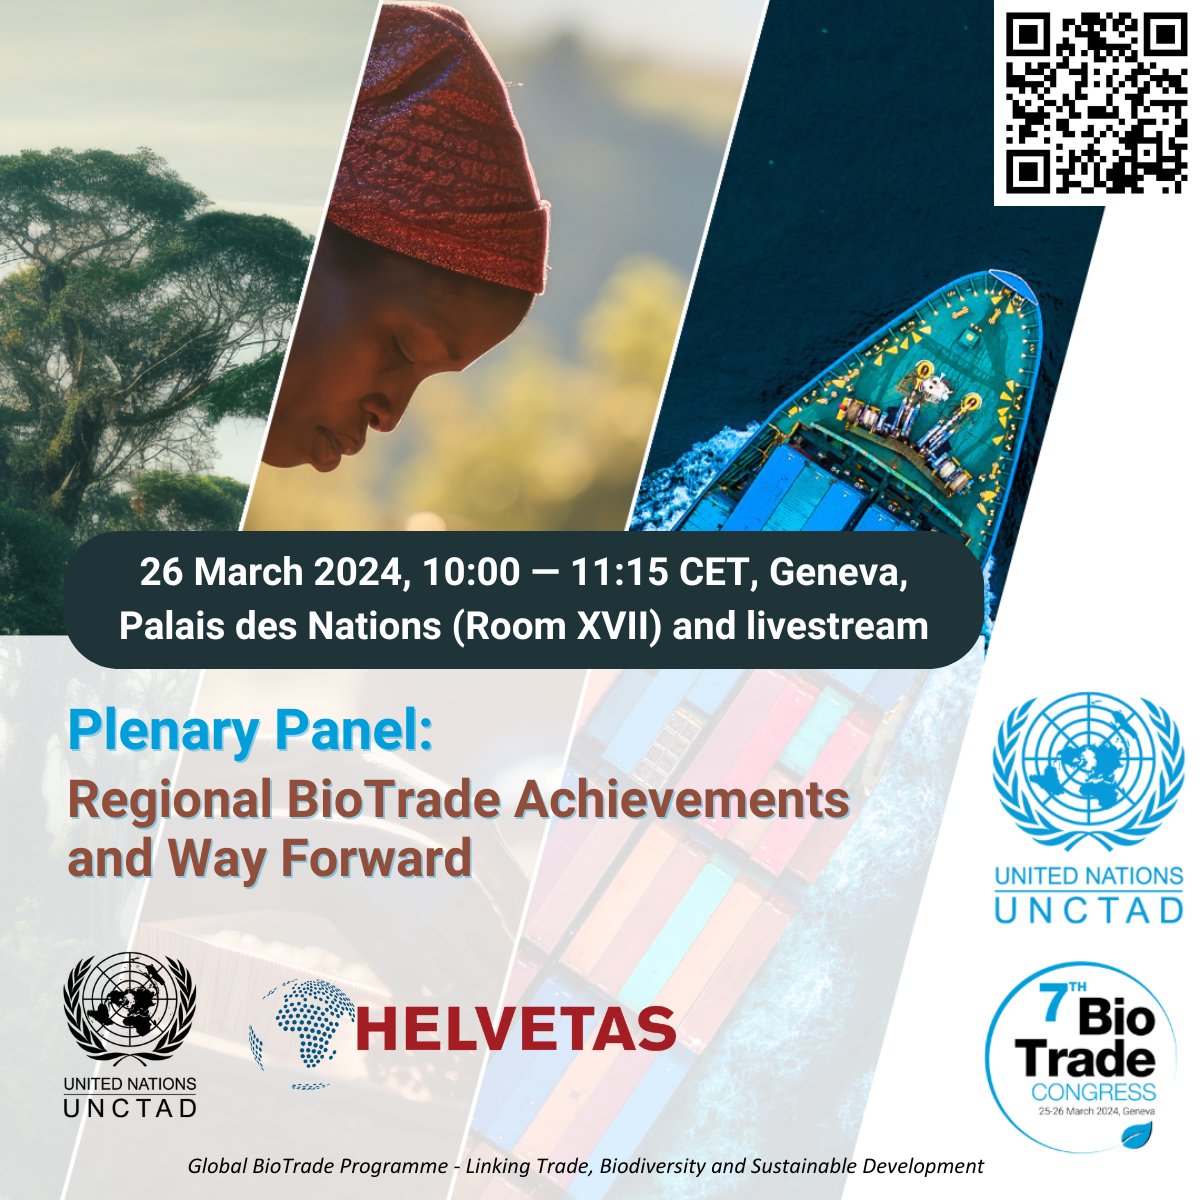 Following the enlightening discussions of the first day, the 7th #BioTrade Congress resumes its activities shortly. The first session today, organised by Helvetas will shift attention to 'Regional BioTrade Achievements and the Way Forward'. Register here: bit.ly/BioTrade-Congr…